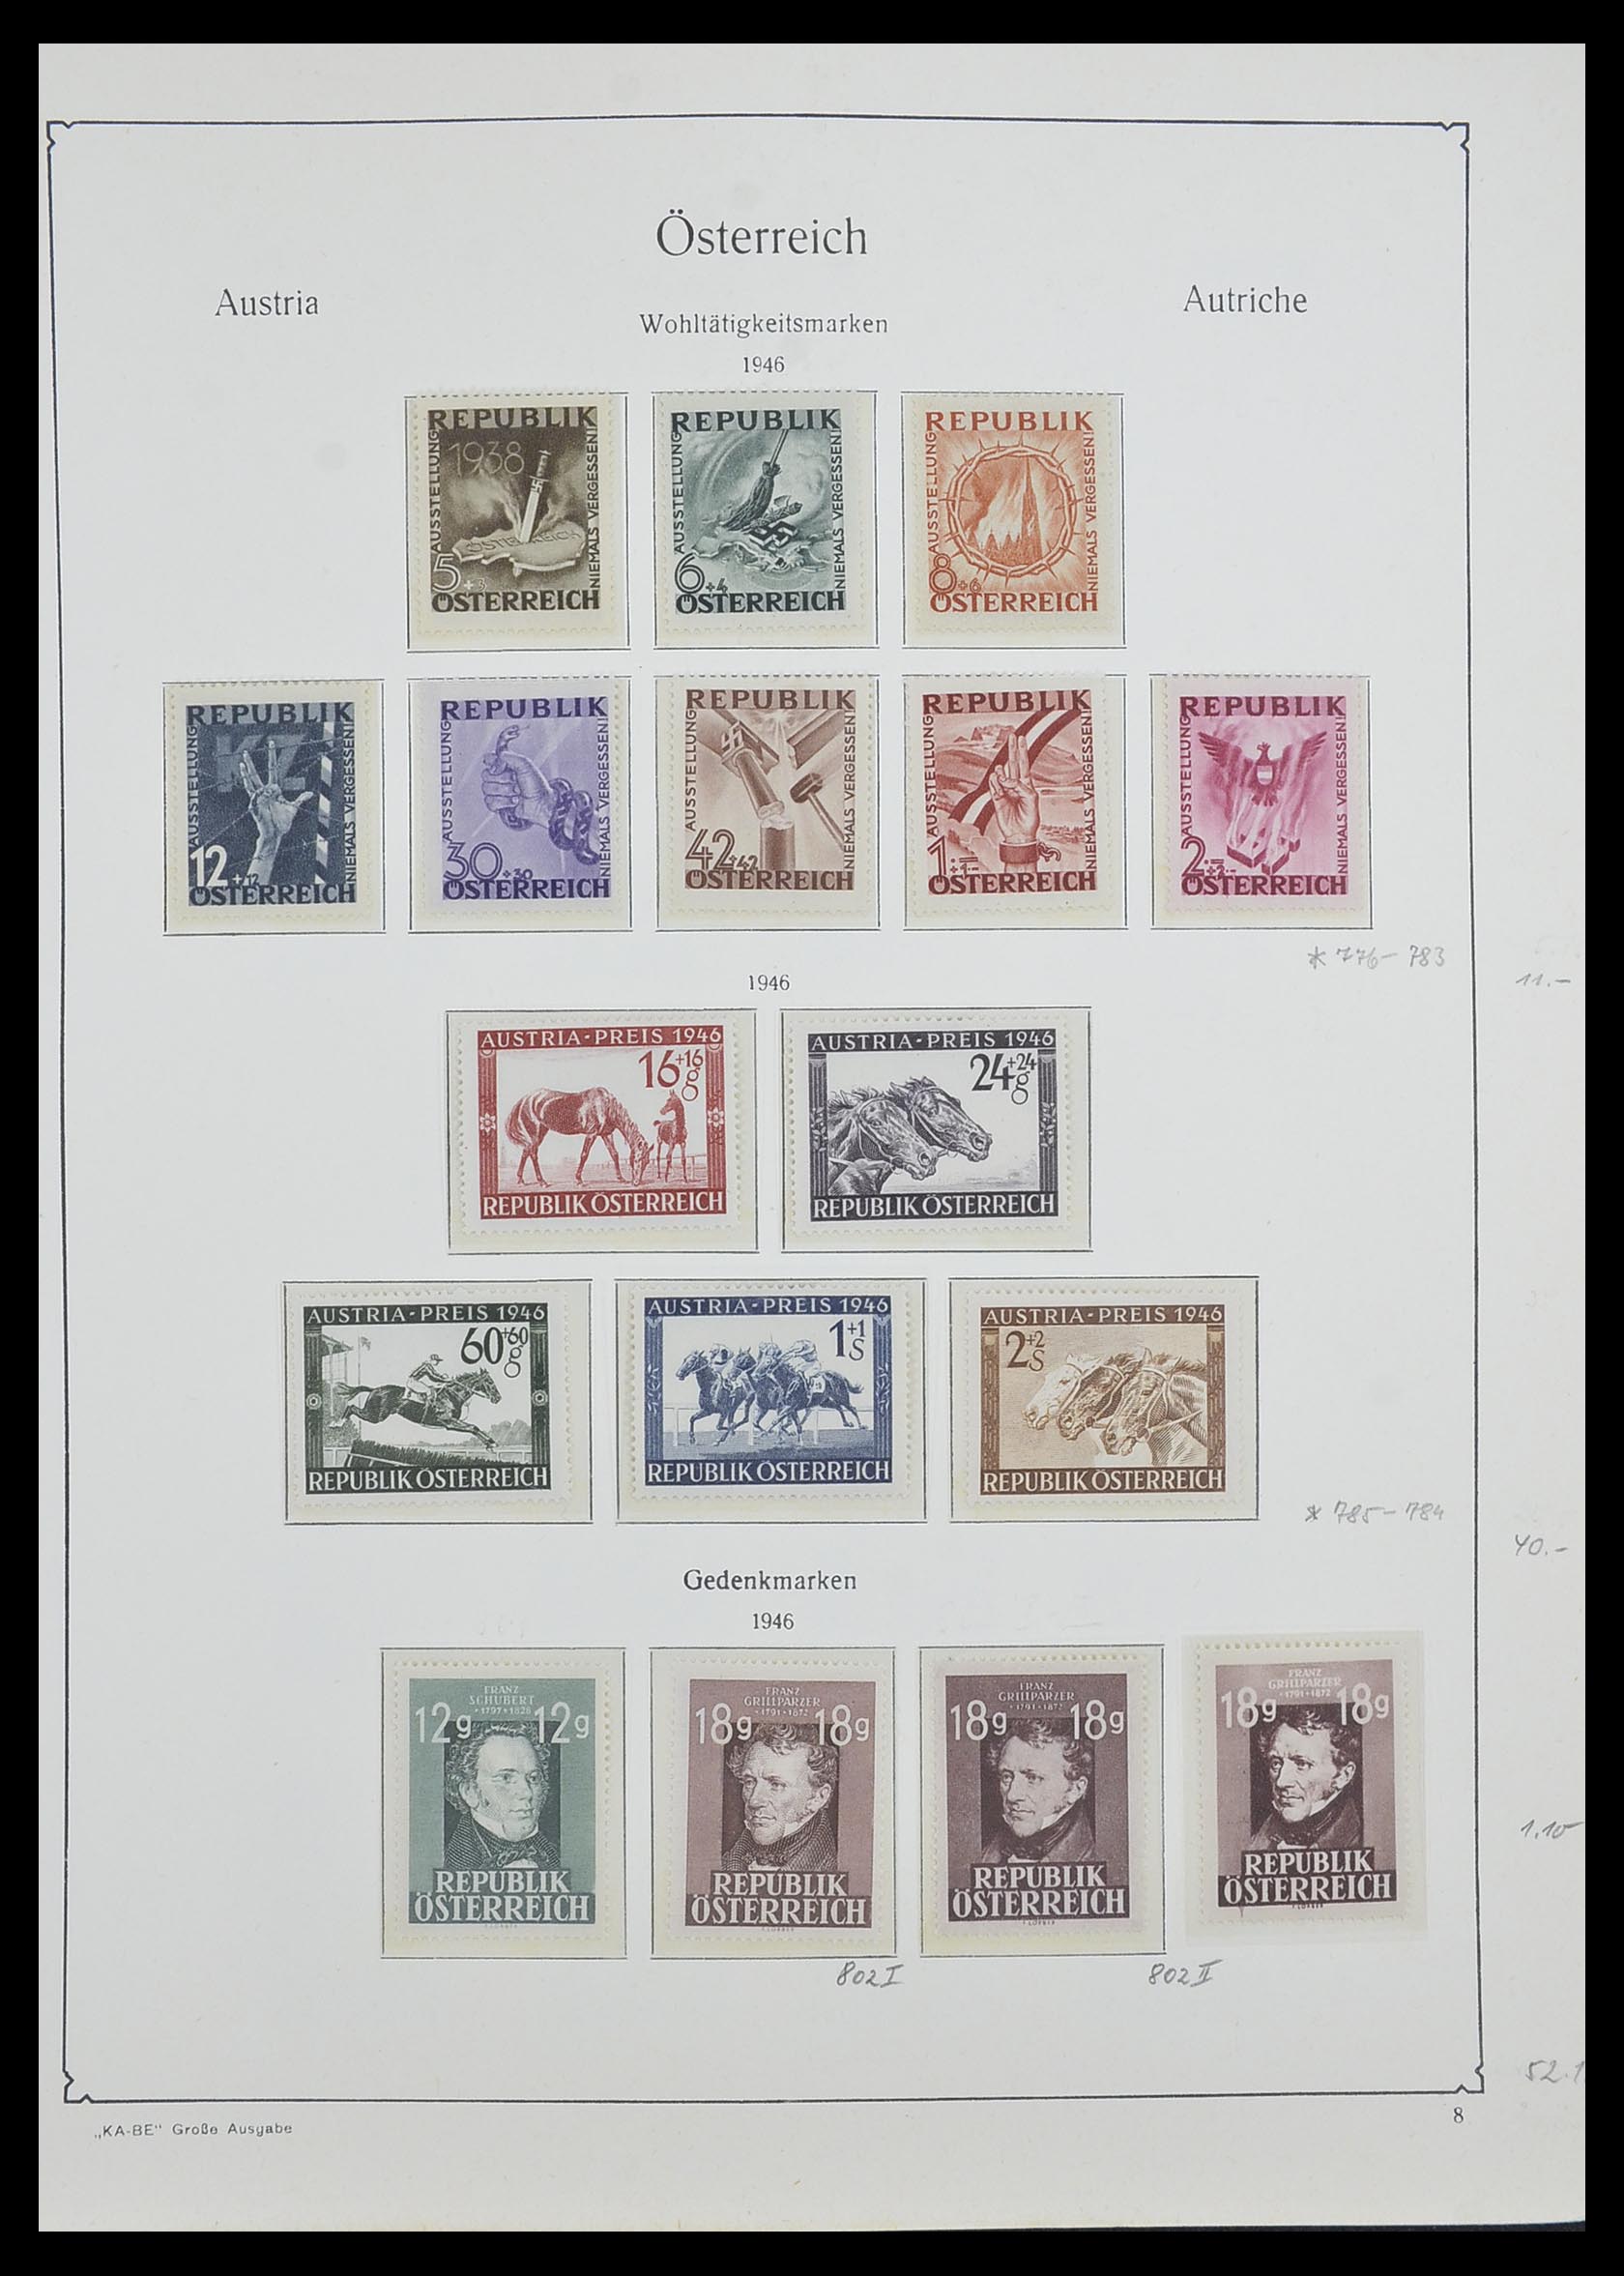 33593 049 - Stamp collection 33593 Austria and territories 1850-1959.